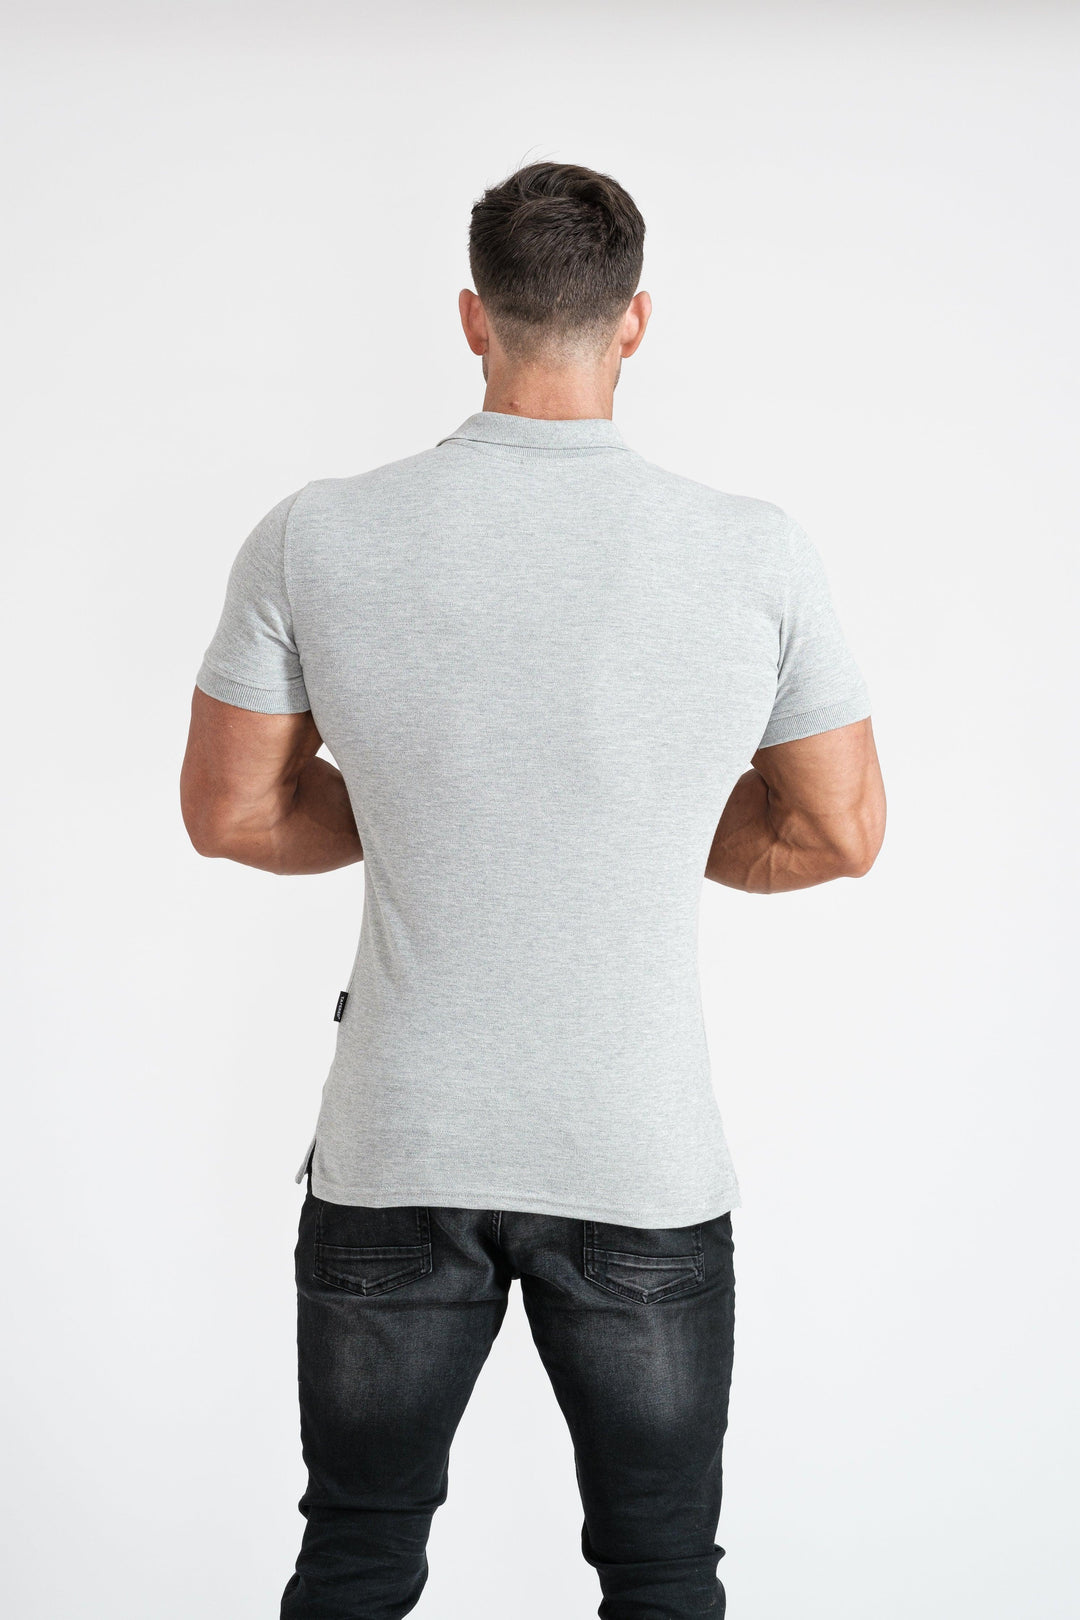 Grey Muscle Fit Polo Shirt For Men. A Proportionally Fitted and Muscle Fit Grey Polo shirt for men. Ideal for muscular guys.